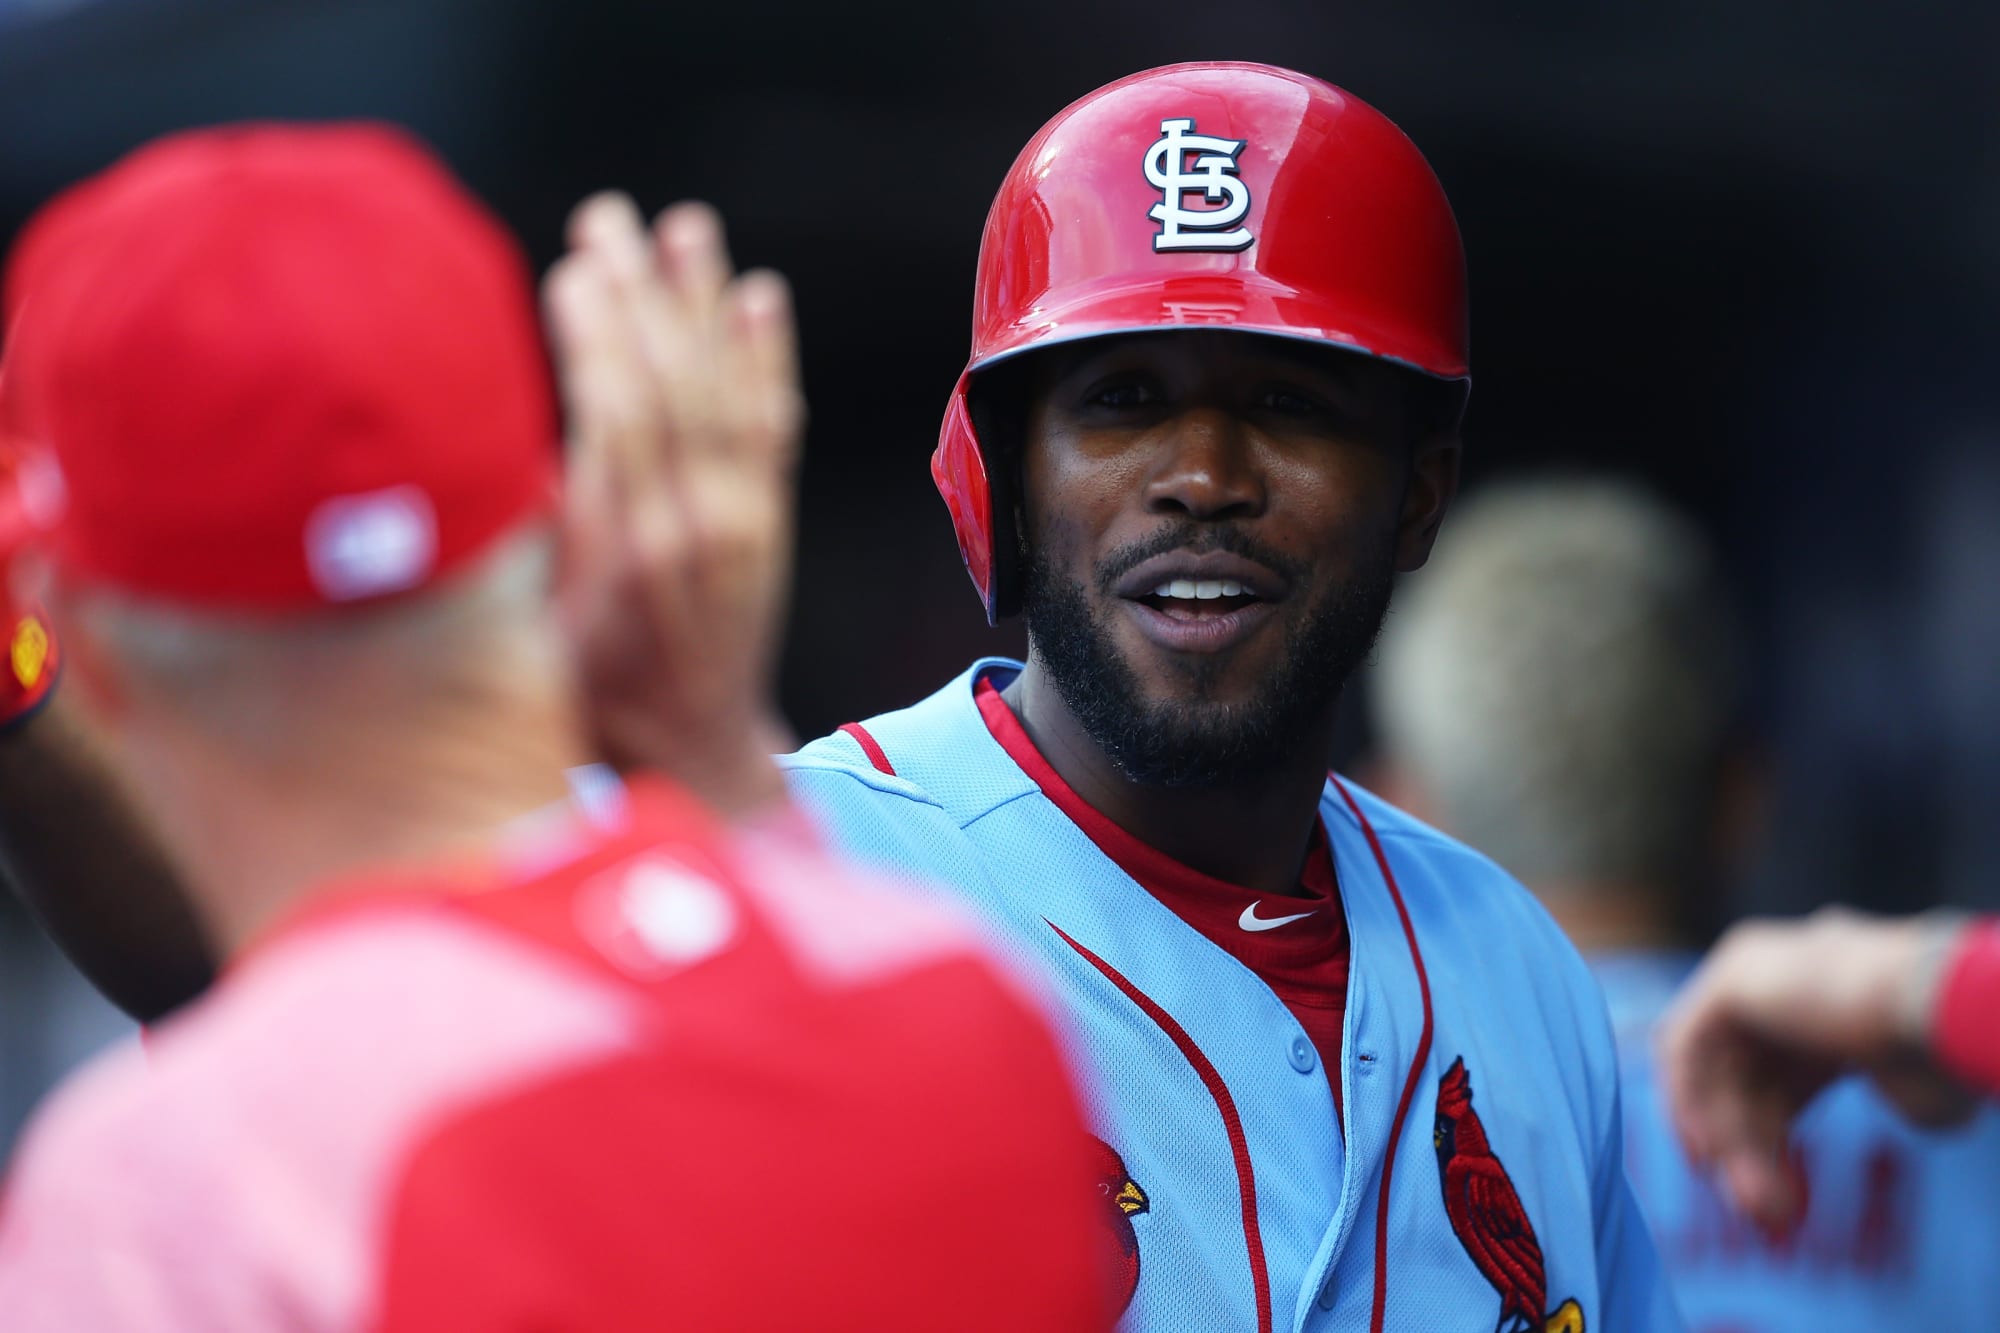 St. Louis Cardinals: Play the best, not the best-paid